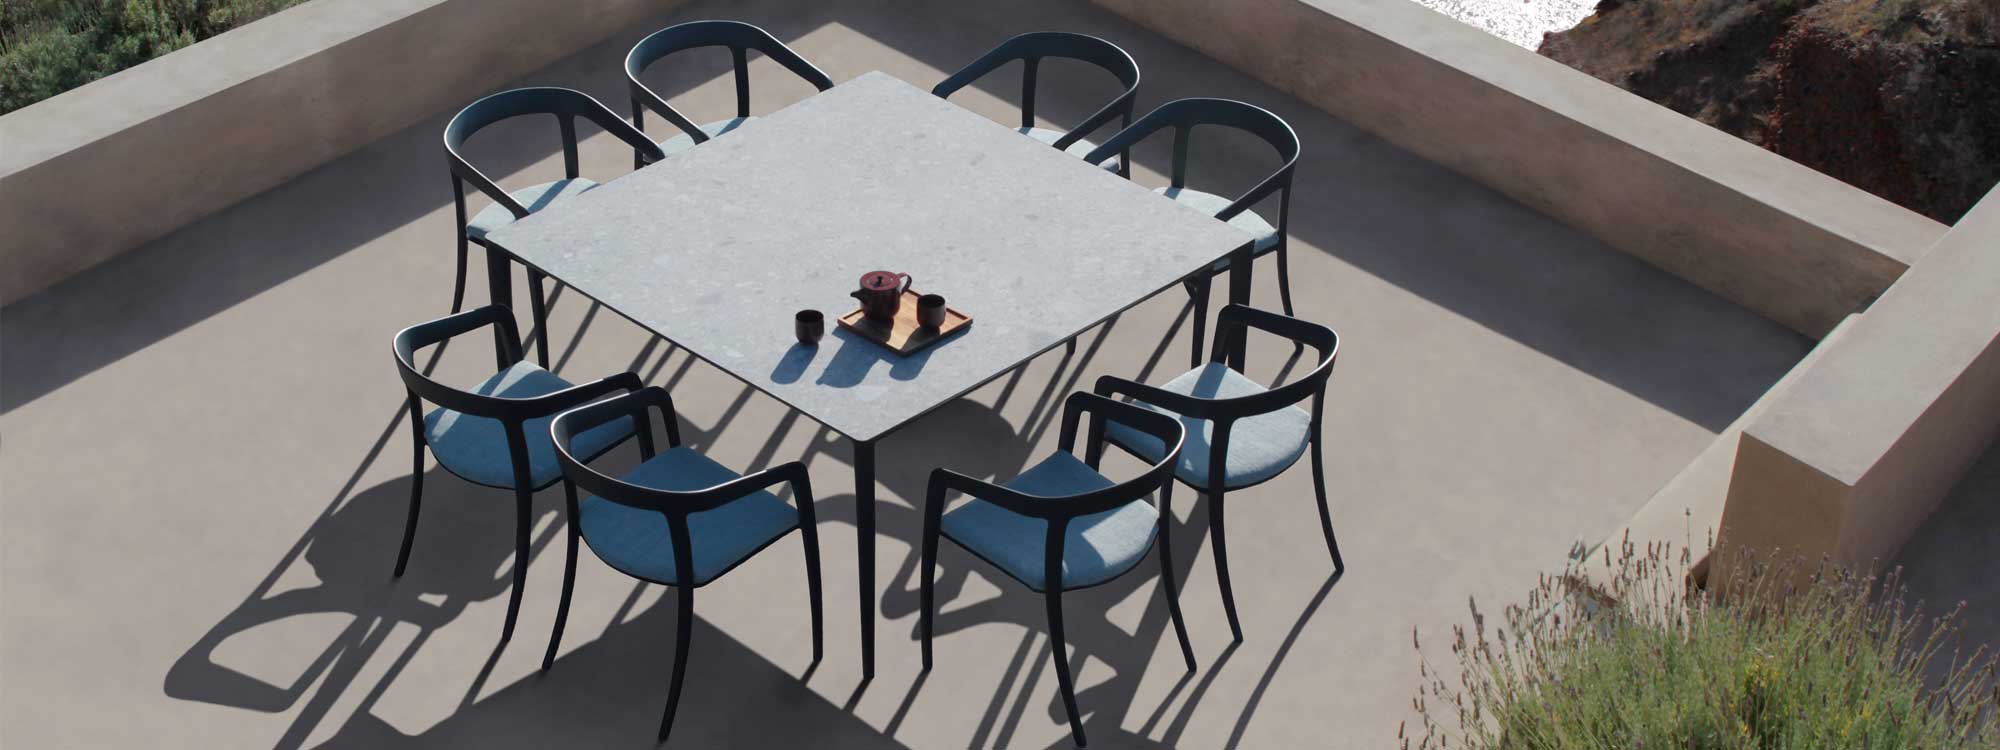 Aerial image of U-nite large square garden table surrounded by 8 Jive chairs by Royal Botania